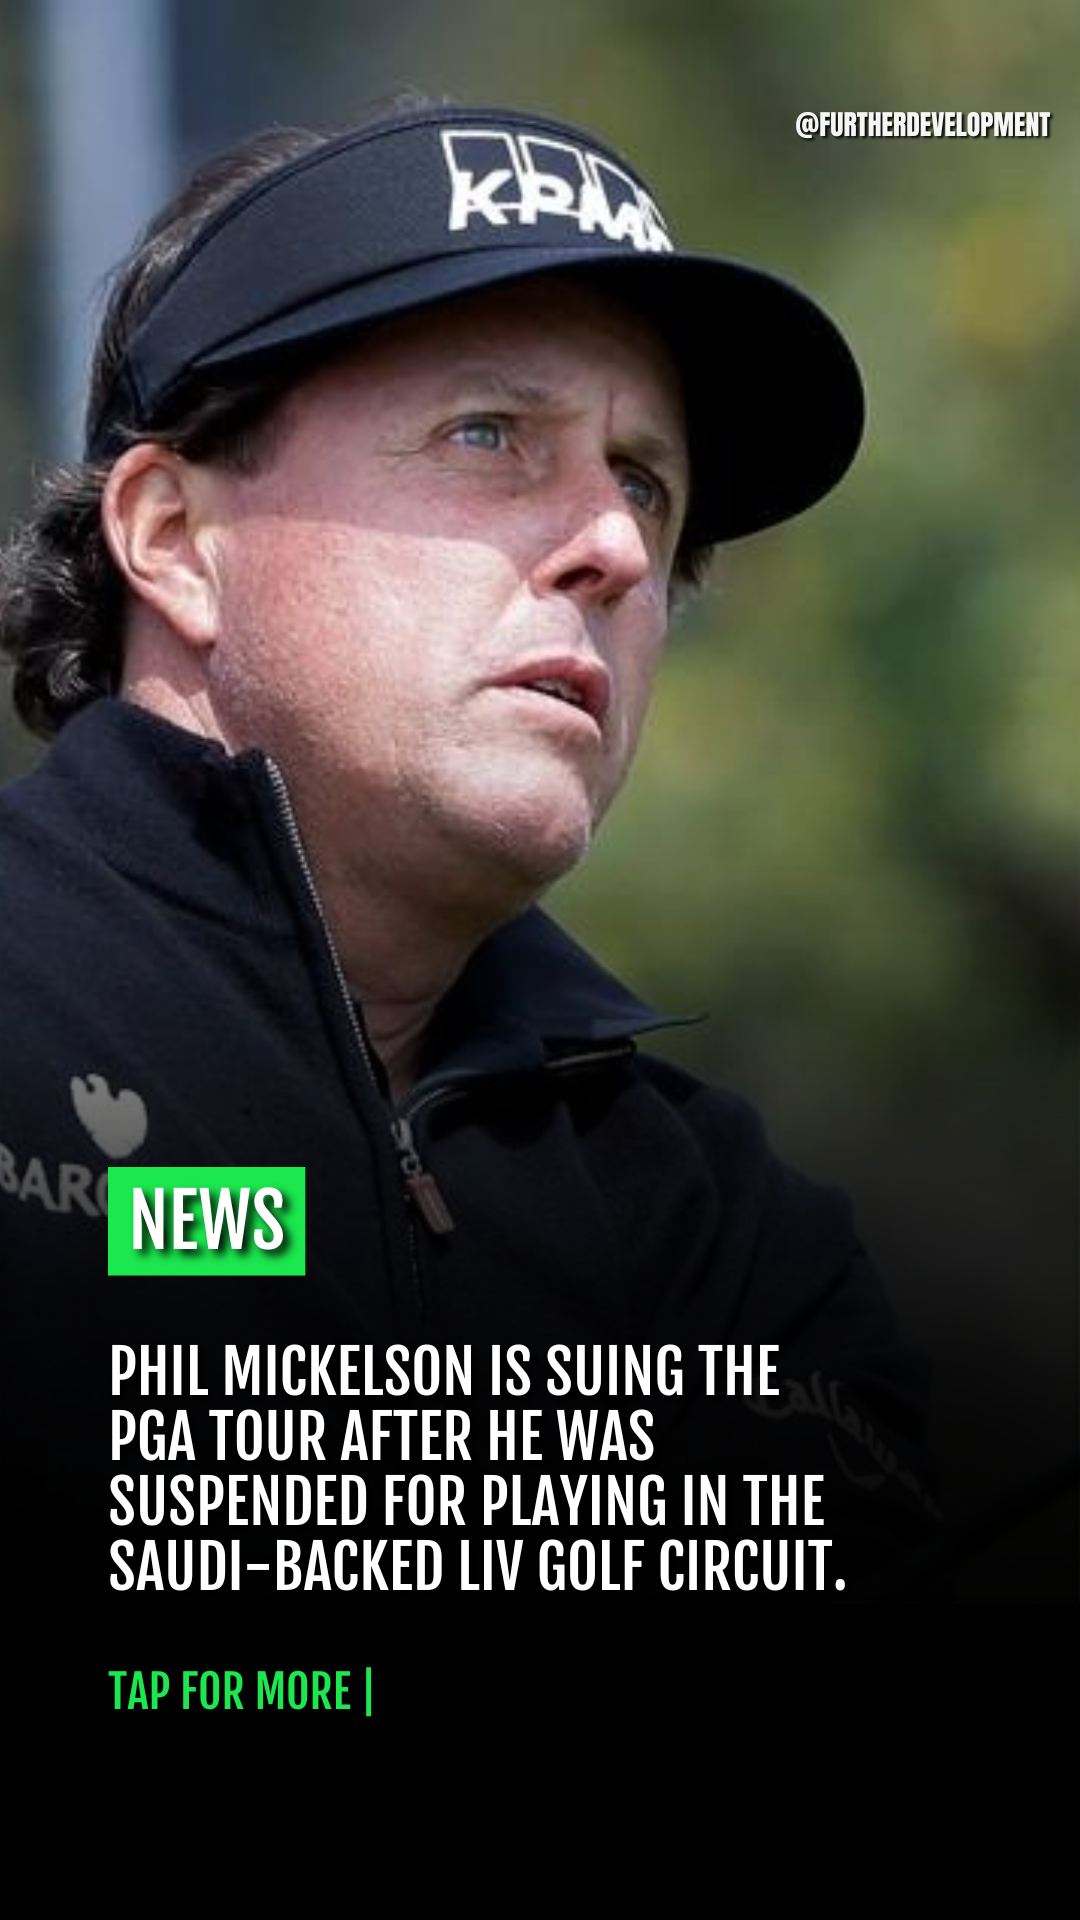 Phil Mickelson is suing the PGA Tour after he was suspended for playing In the Saudi-backed LIV Golf circuit.